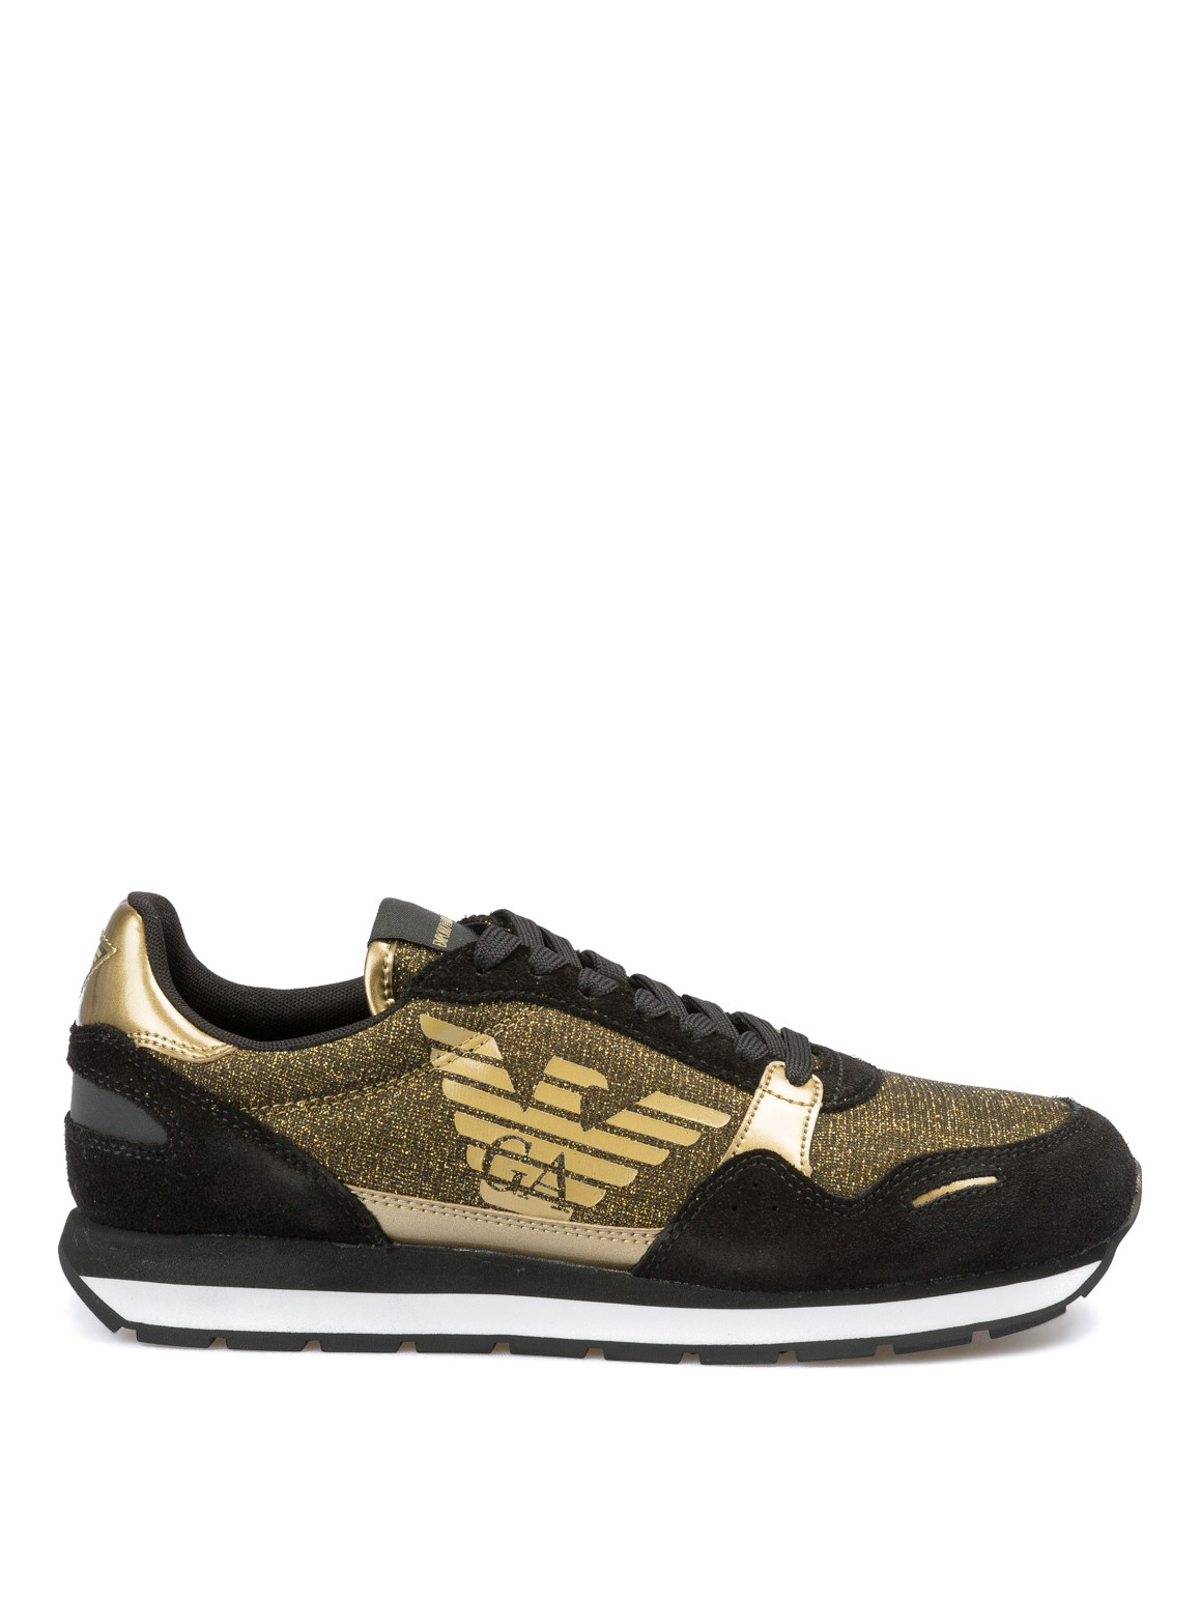 Trainers Emporio Armani - Gold-tone lurex and suede logo sneakers ...